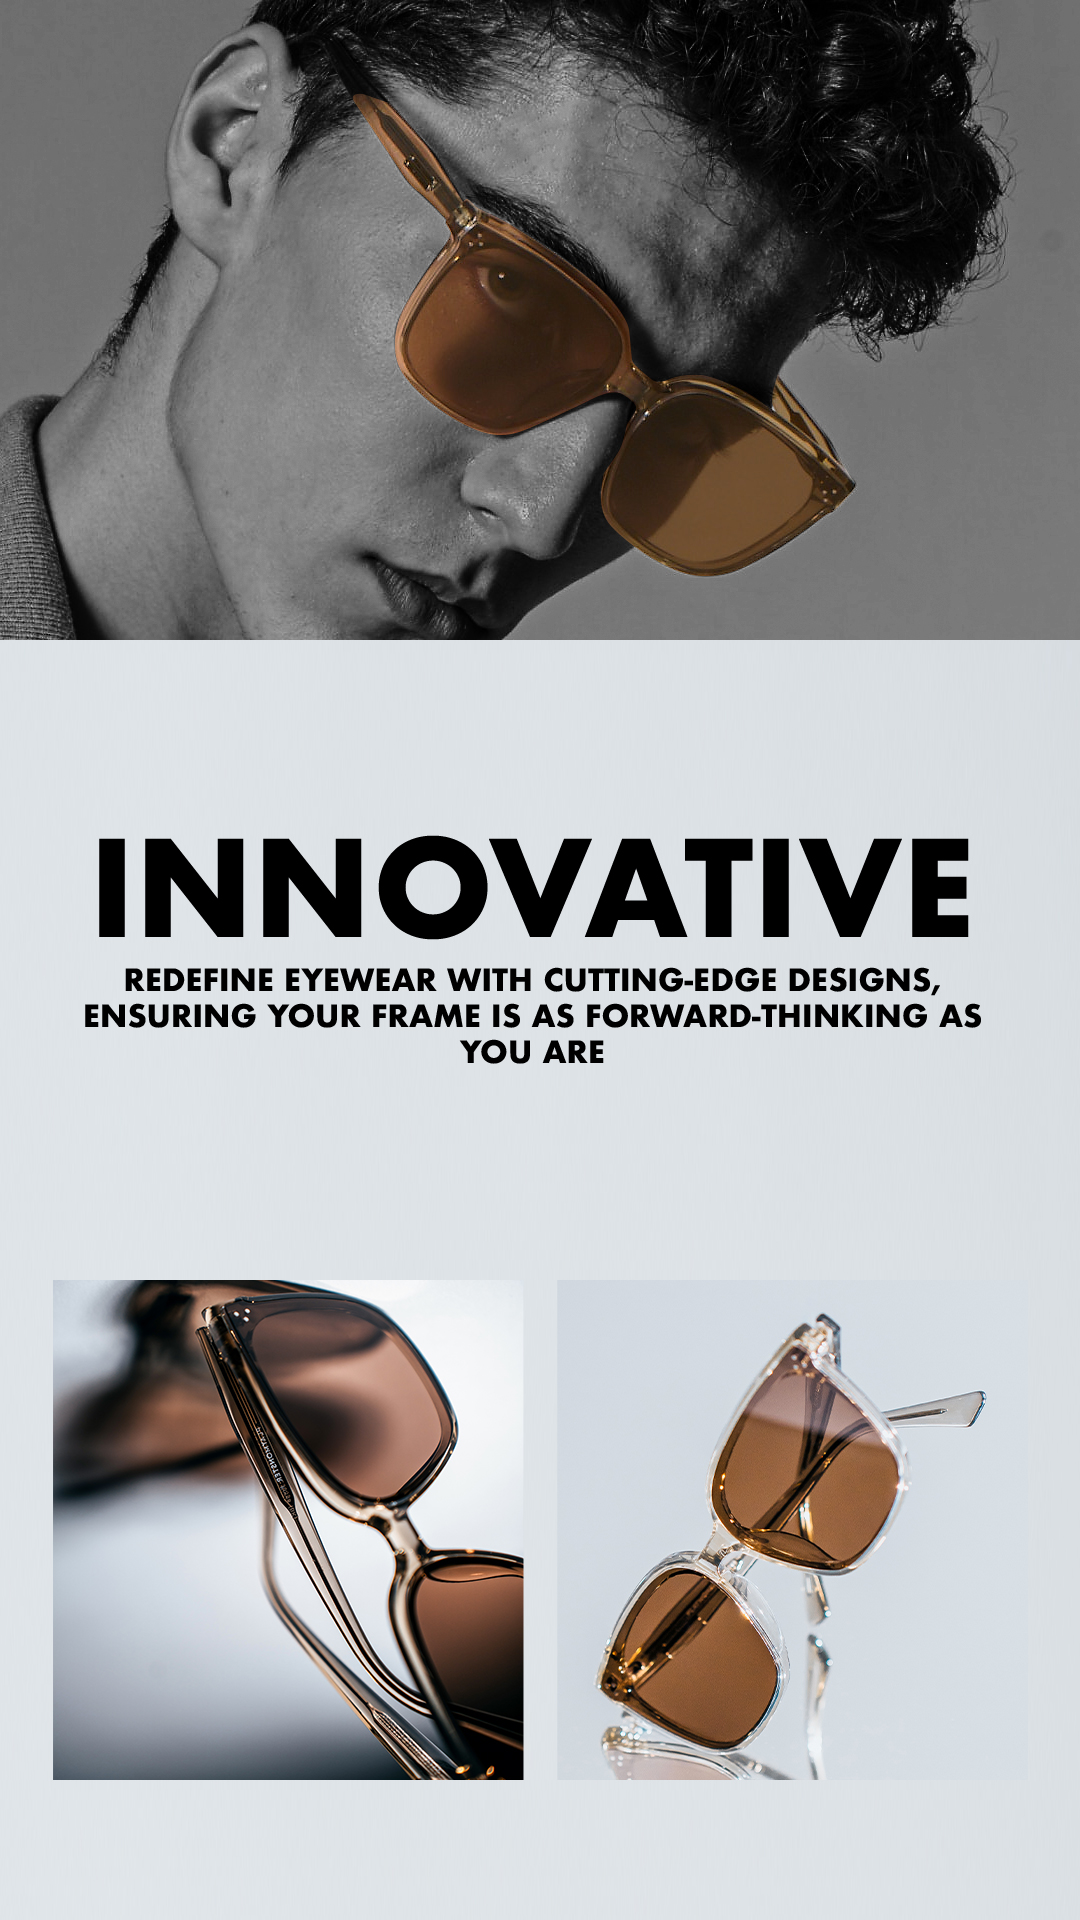 Innovative - Redefine eyewear with cutting-edge designs, ensuring your frame is as forward-thinking as you are